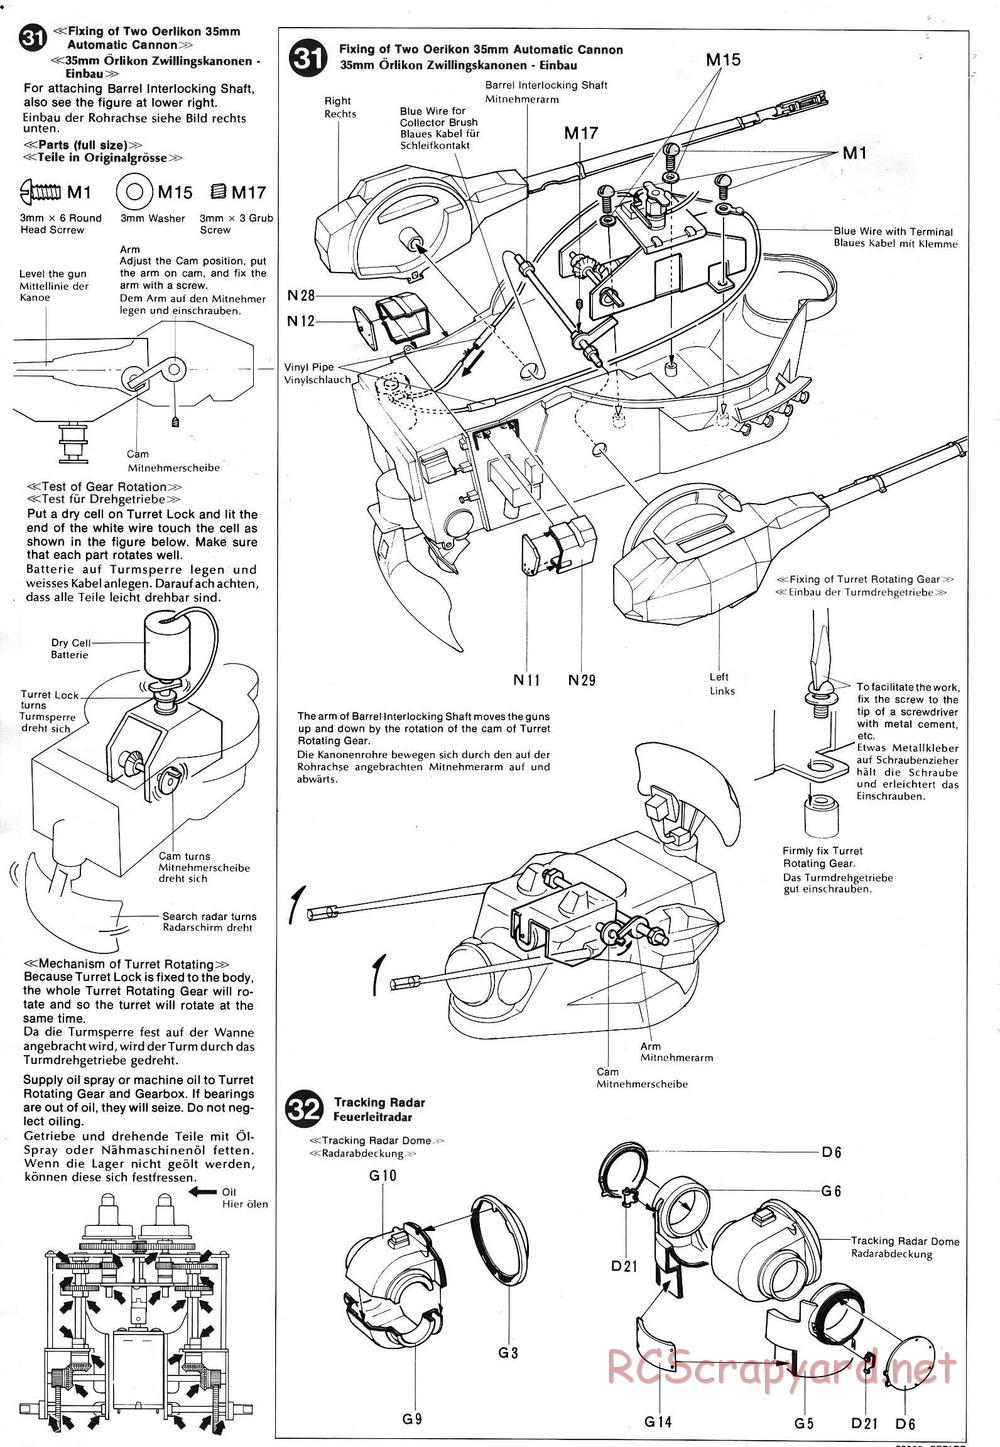 Tamiya - Flakpanzer Gepard - 1/16 Scale Chassis - Manual - Page 14